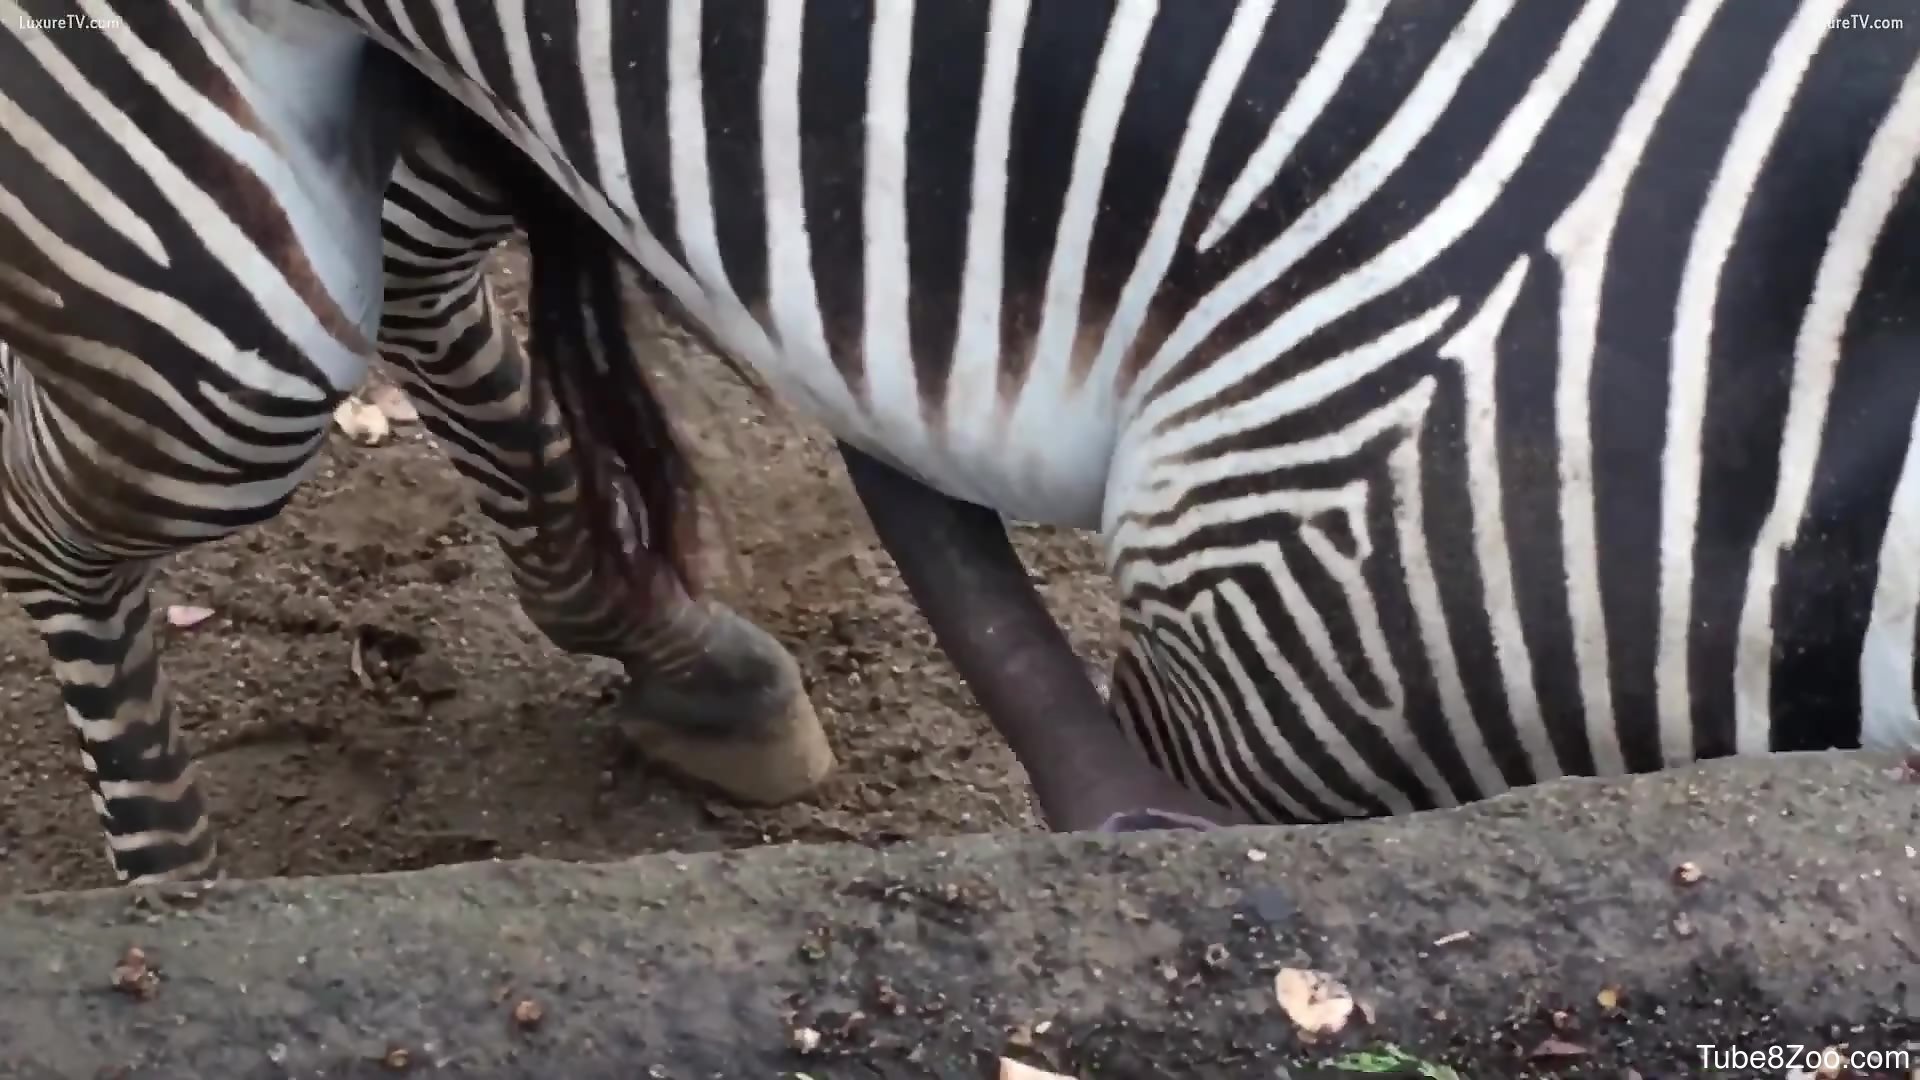 Zebra cock continues to grow in a hot porno here